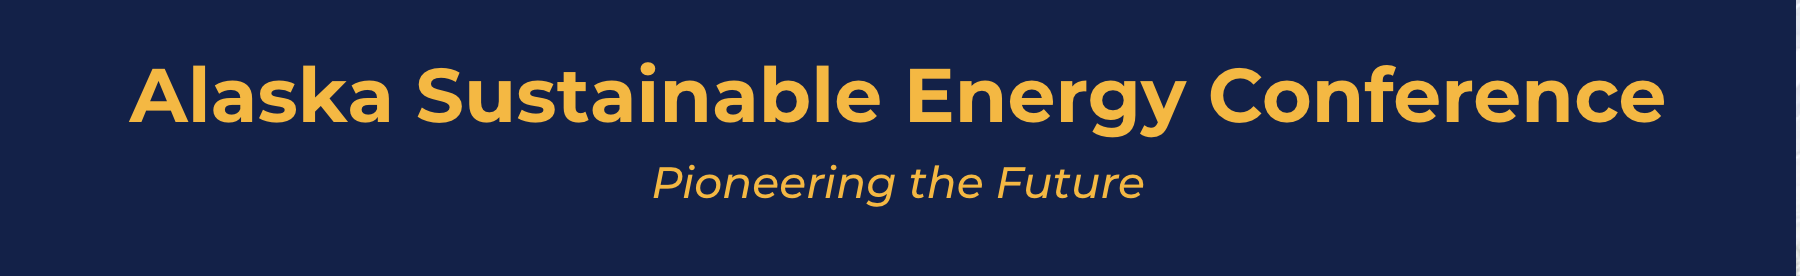 Register Now for the Alaska Sustainable Energy Conference